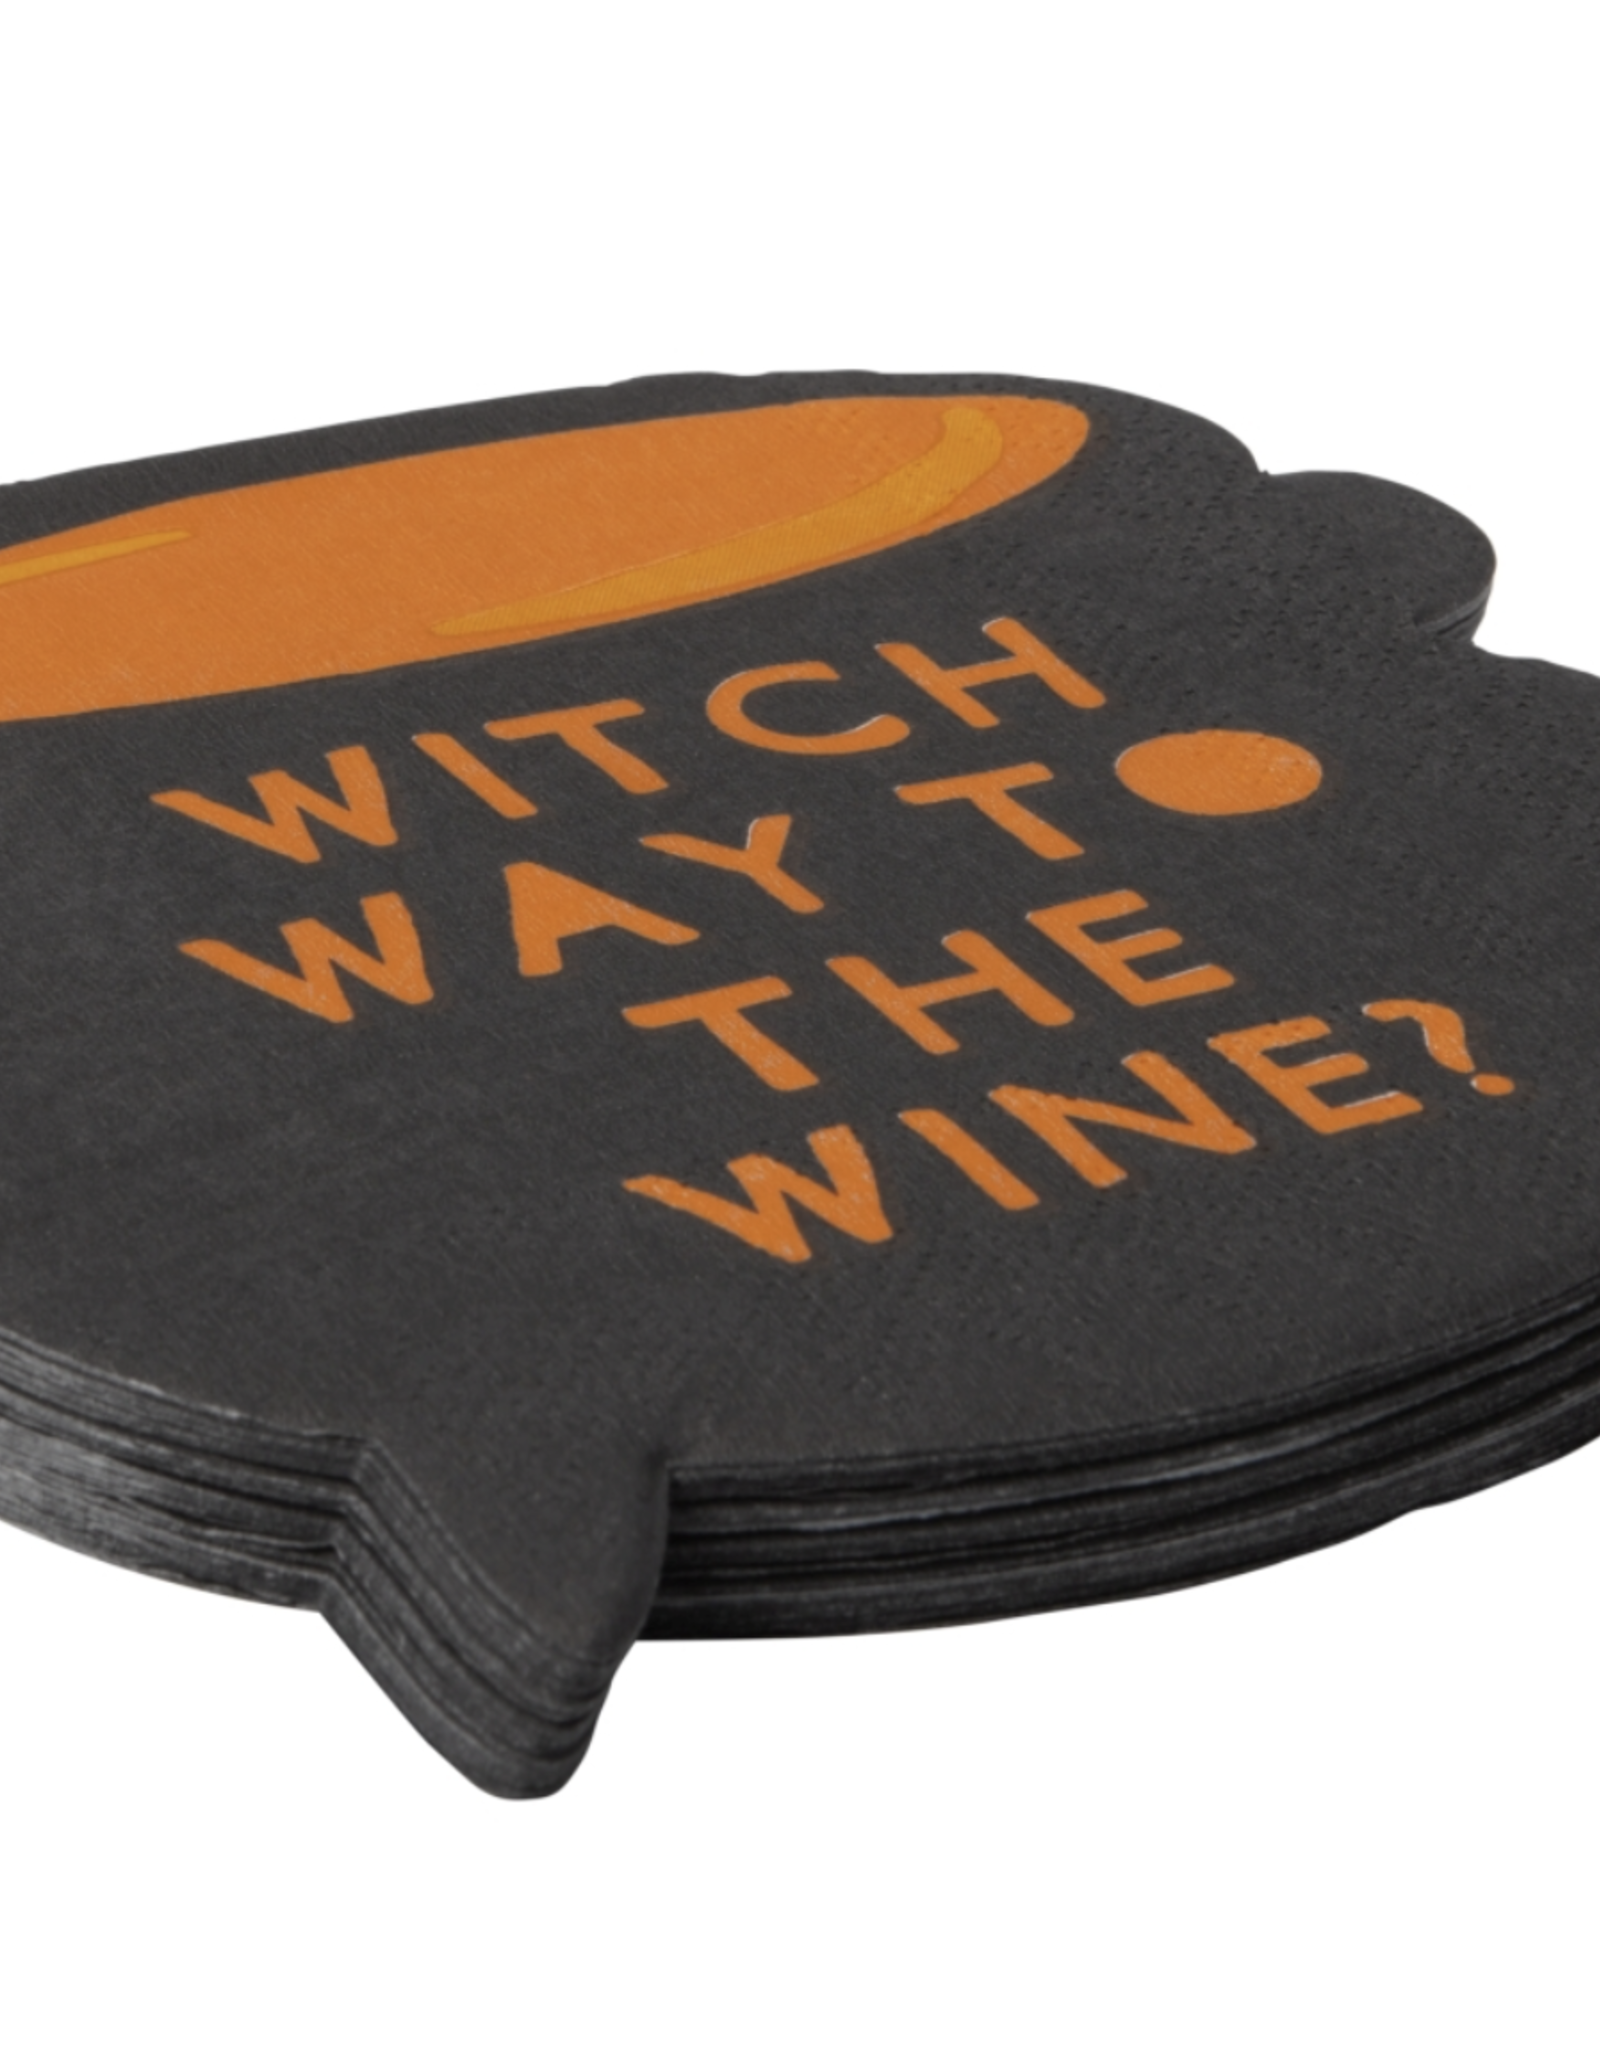 C.R. Gibson Signature Witch Way To The Wine Beverage Napkin 20 Ct.